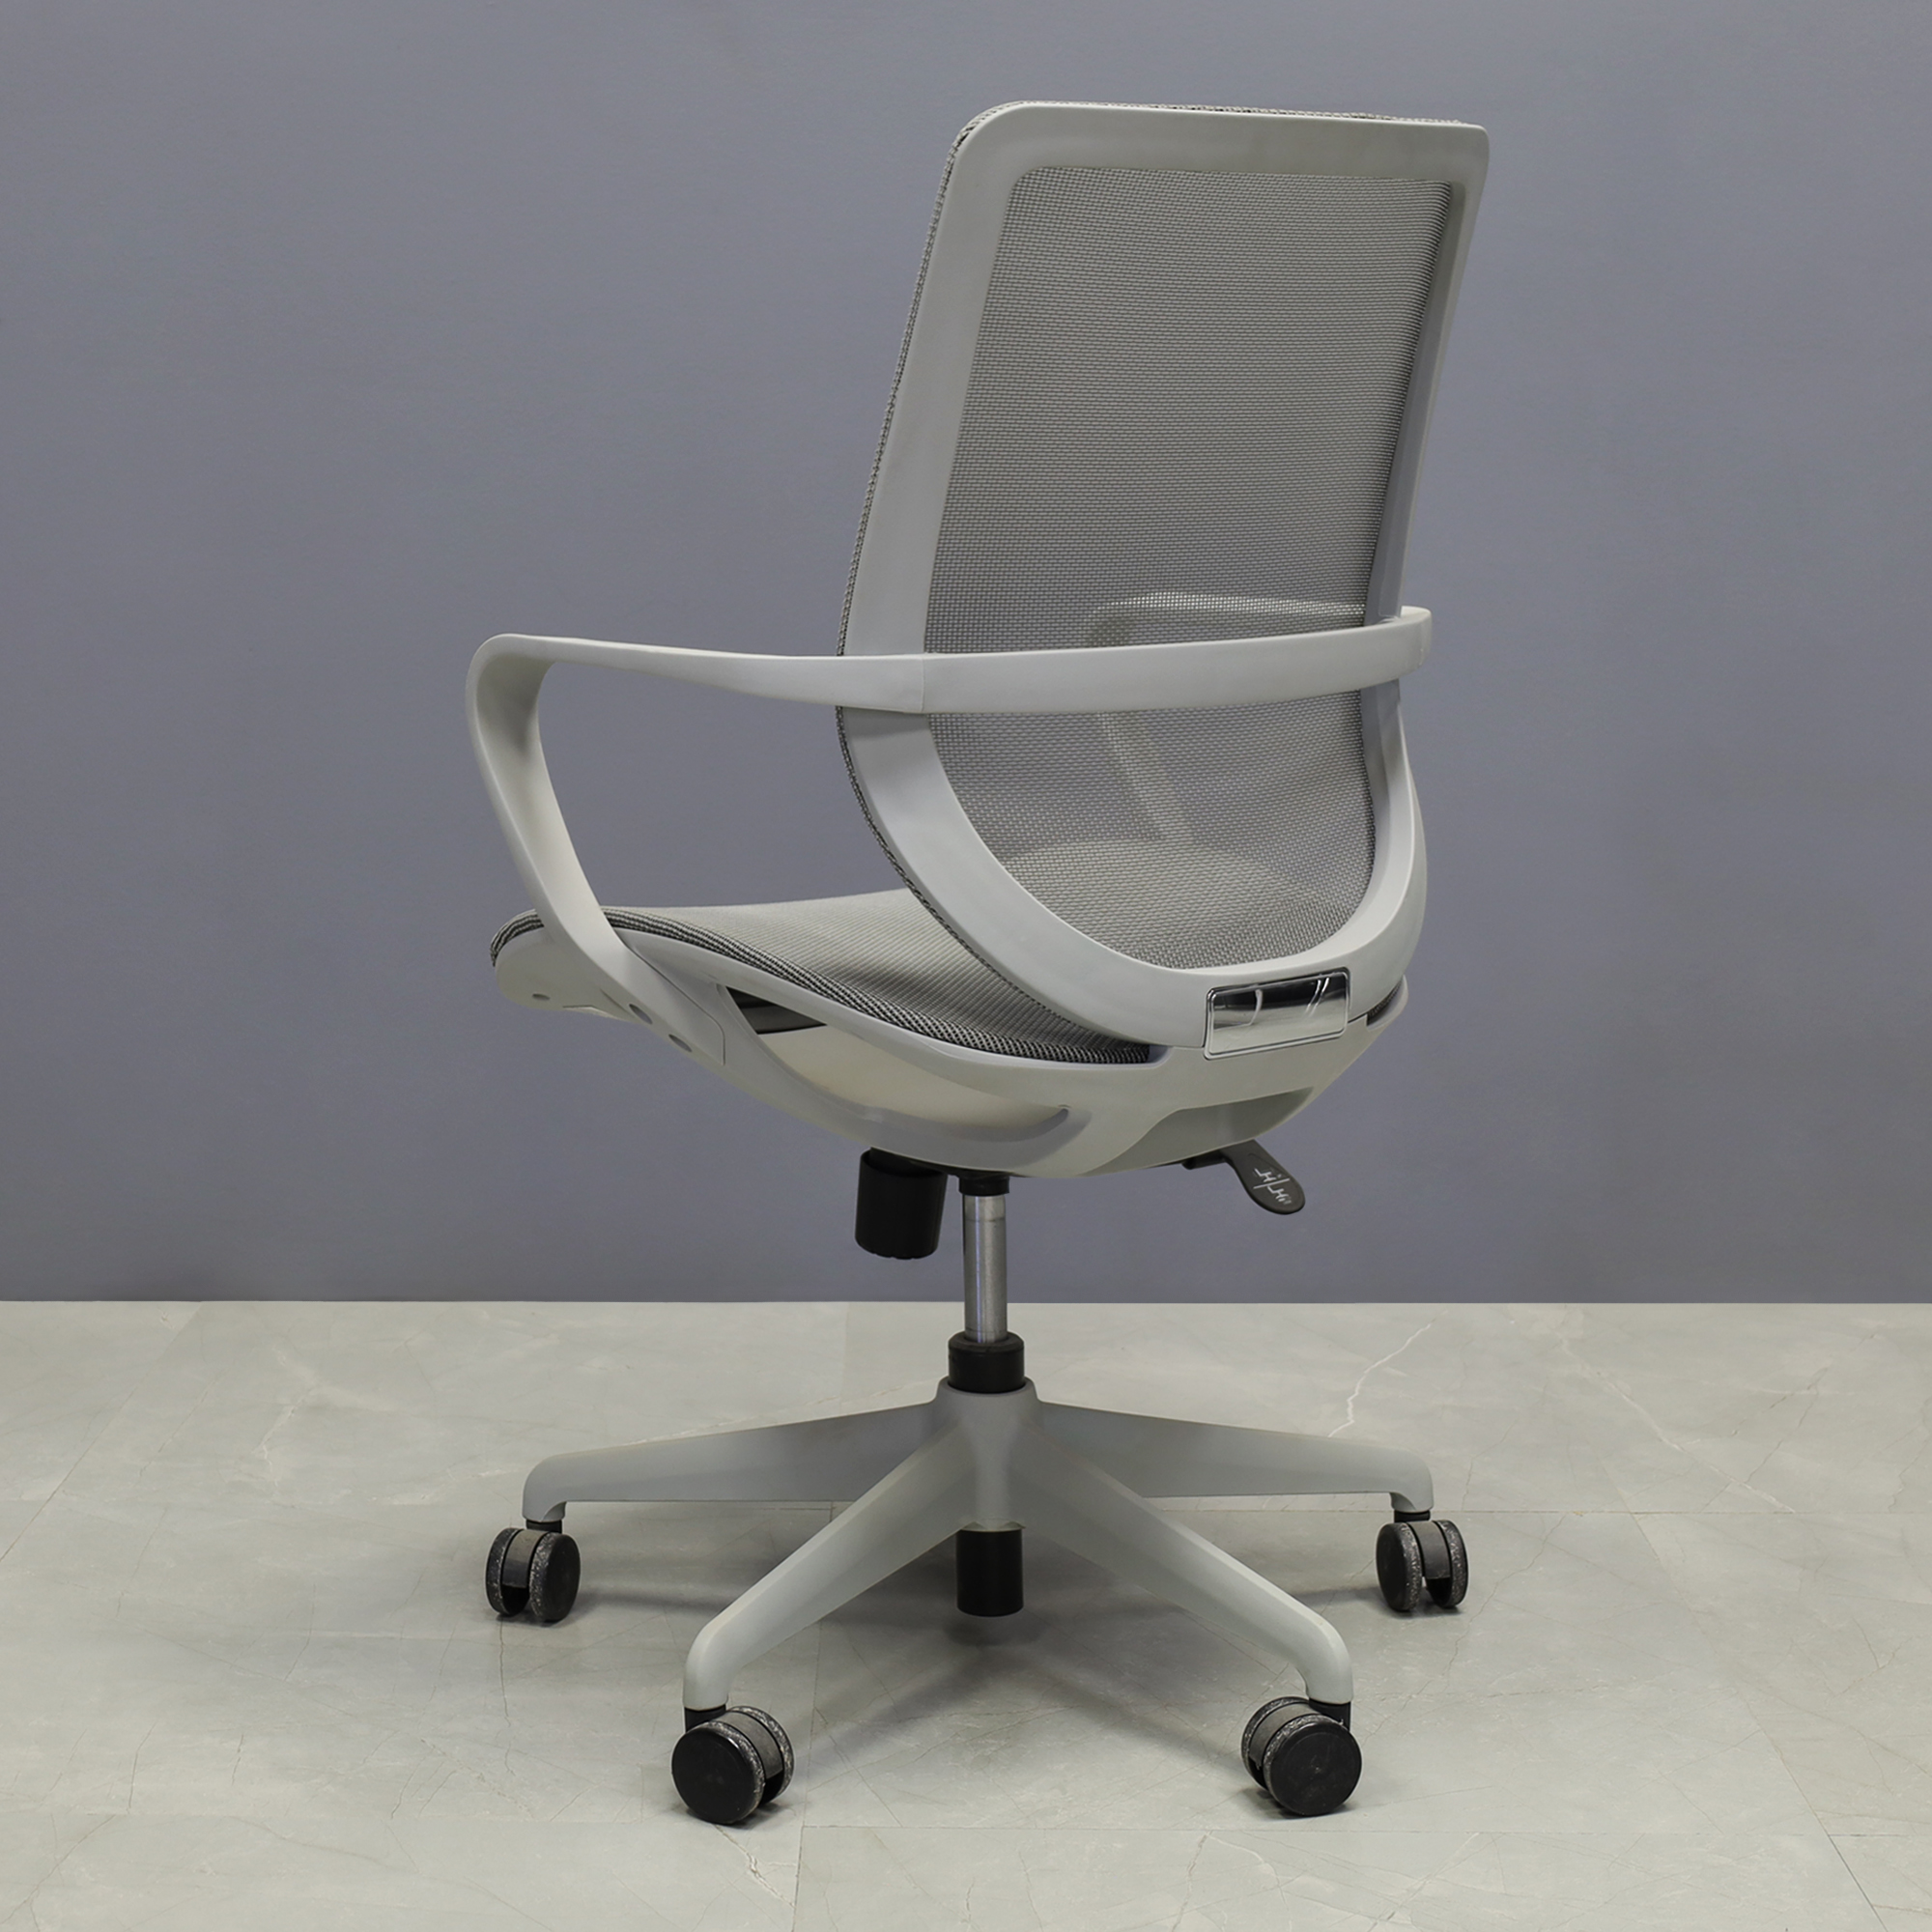 Megan Fabric High-Back Commercial Office Chair, shown here.